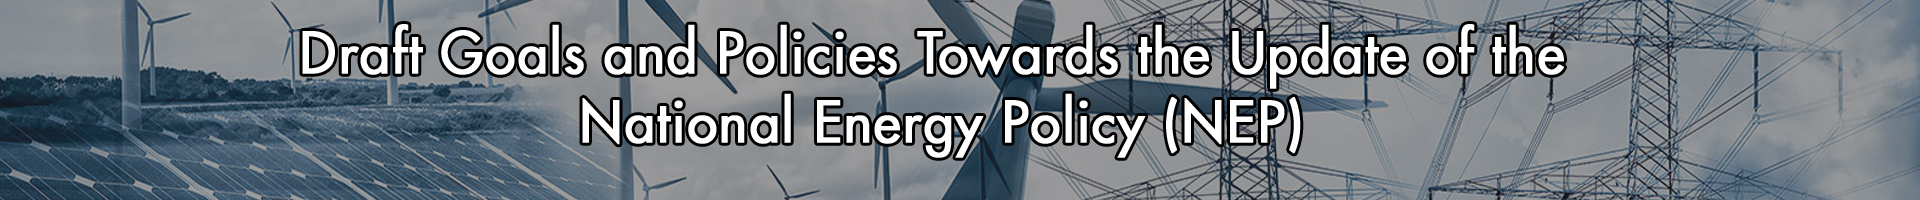 Draft Goals and Policies  Towards the Update of the National Energy Policy (NEP)